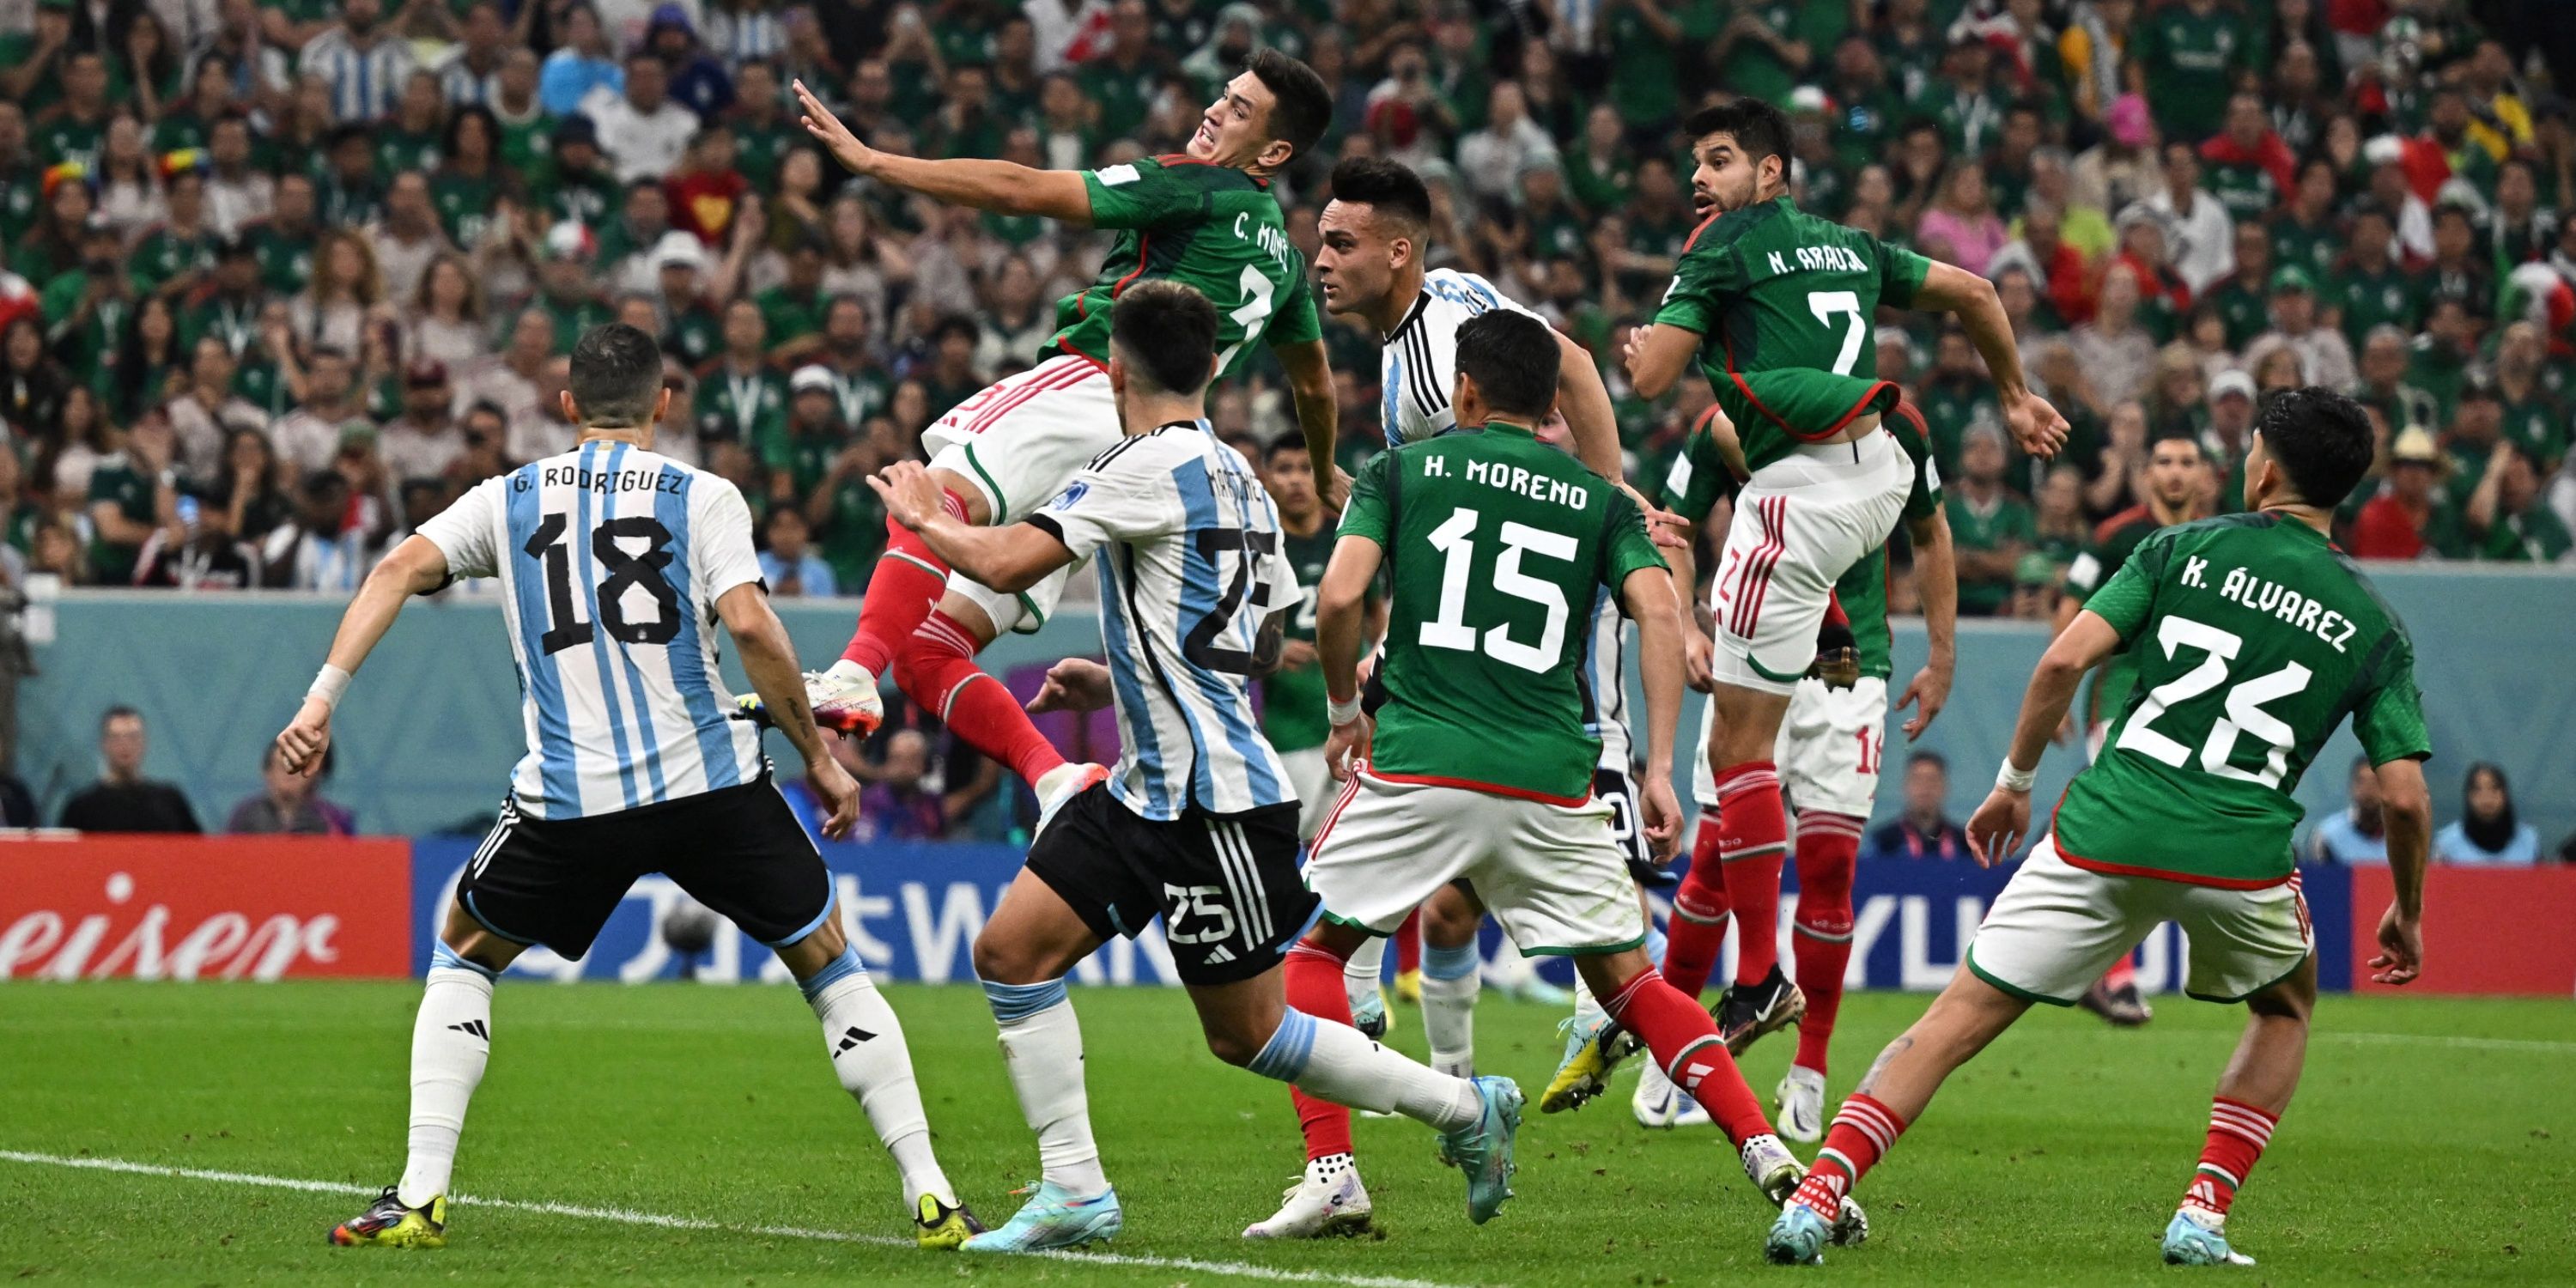 Mexico vs Argentina players at the 2022 World Cup